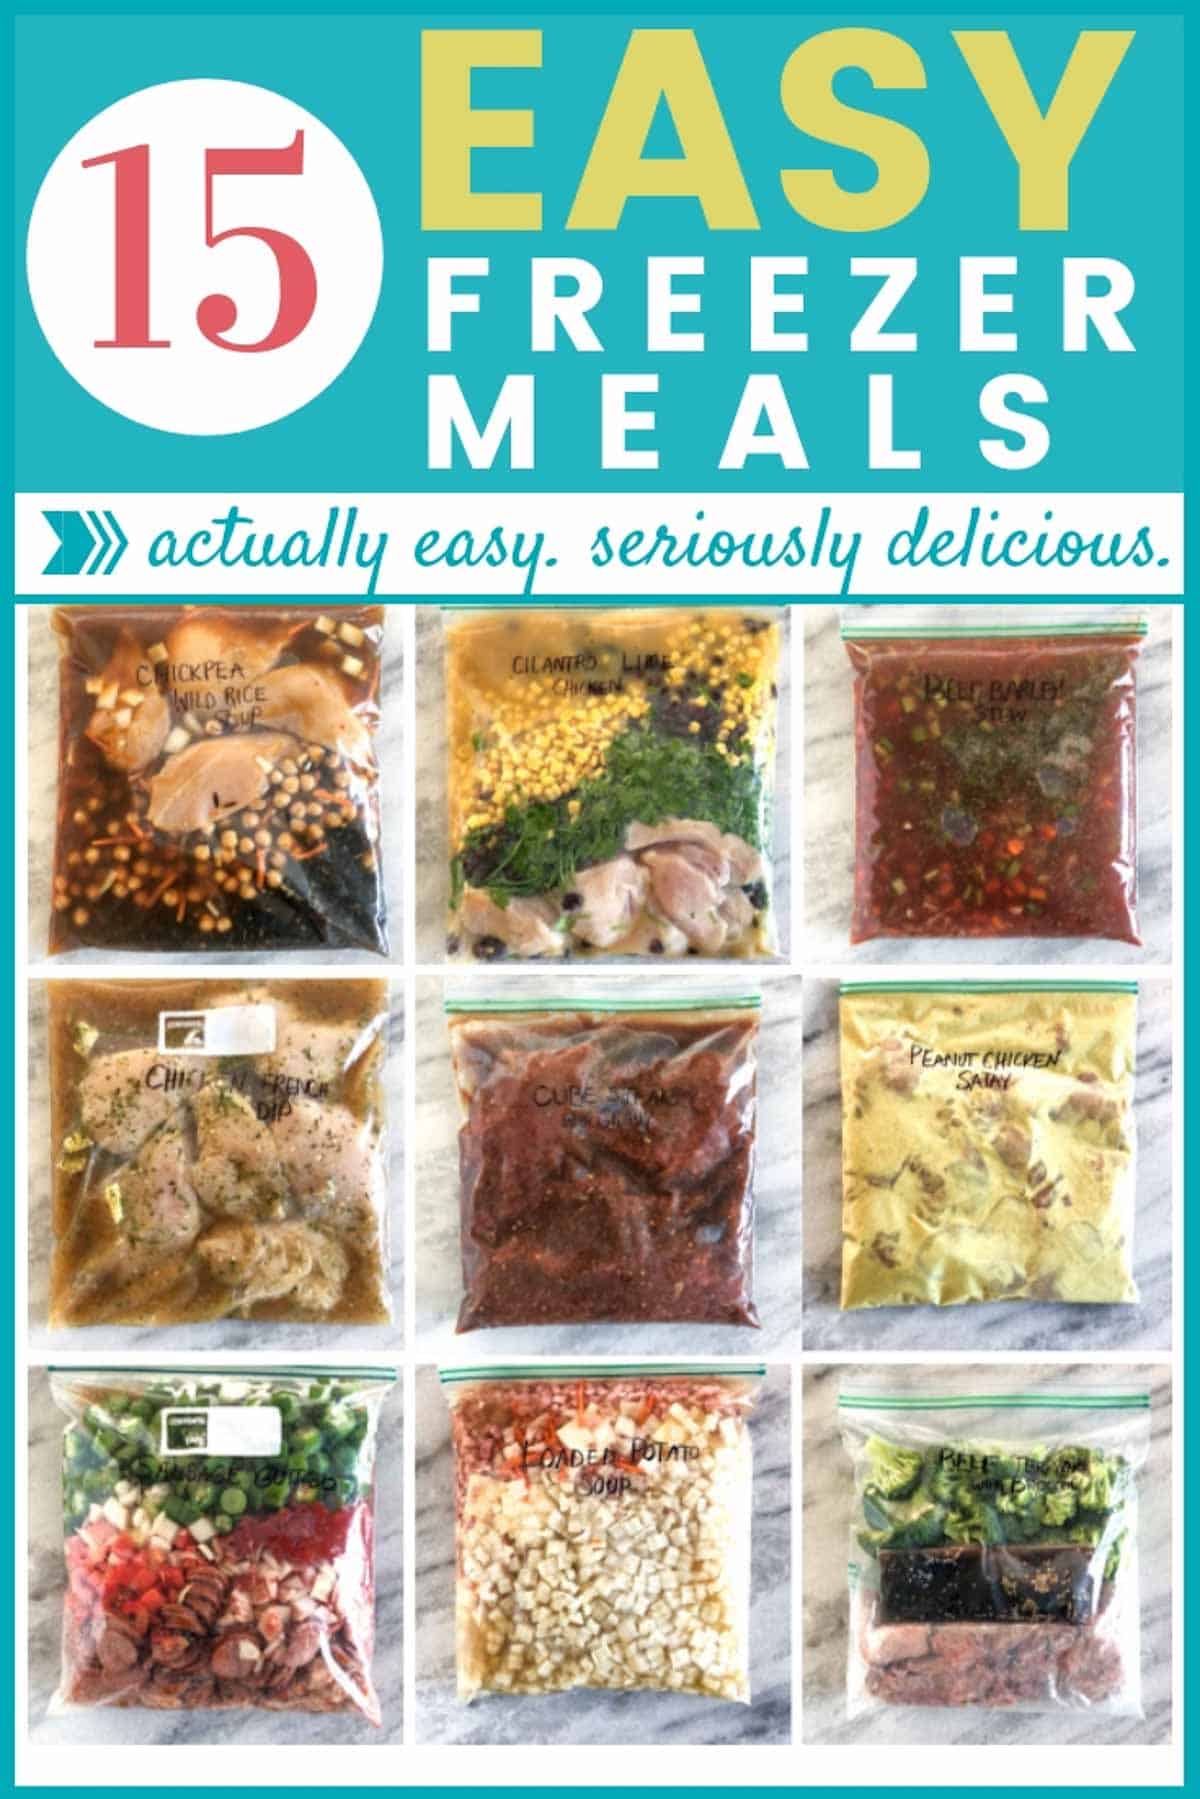 Easy Freezer Meals that are actually easy and seriously delicious. Bagged make ahead freezer meals.